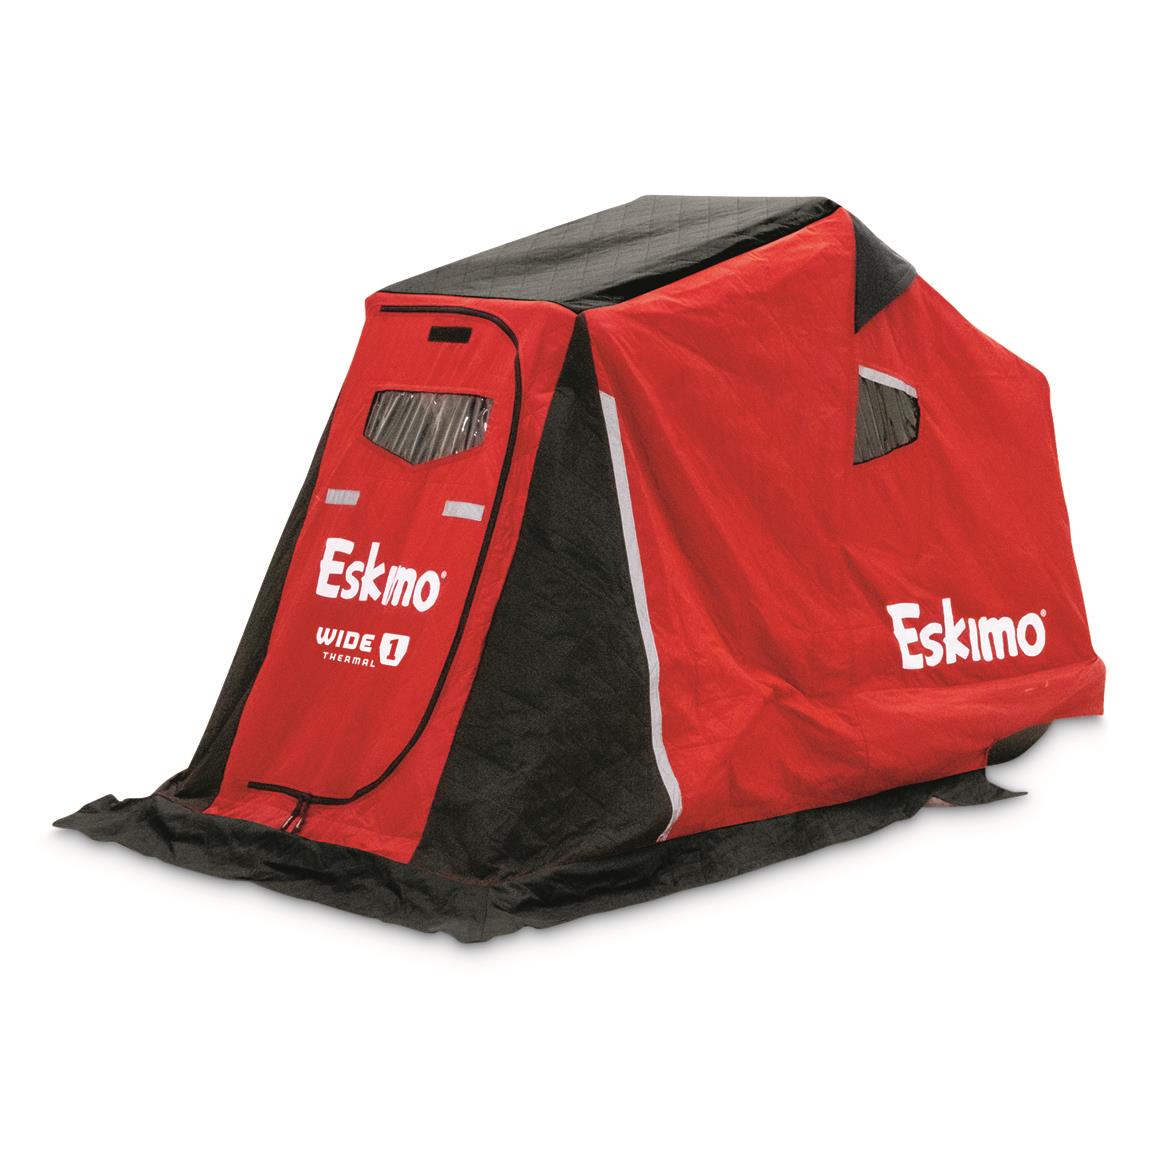 Eskimo Wide 1 Thermal Ice Fishing Shelter, 1-Person